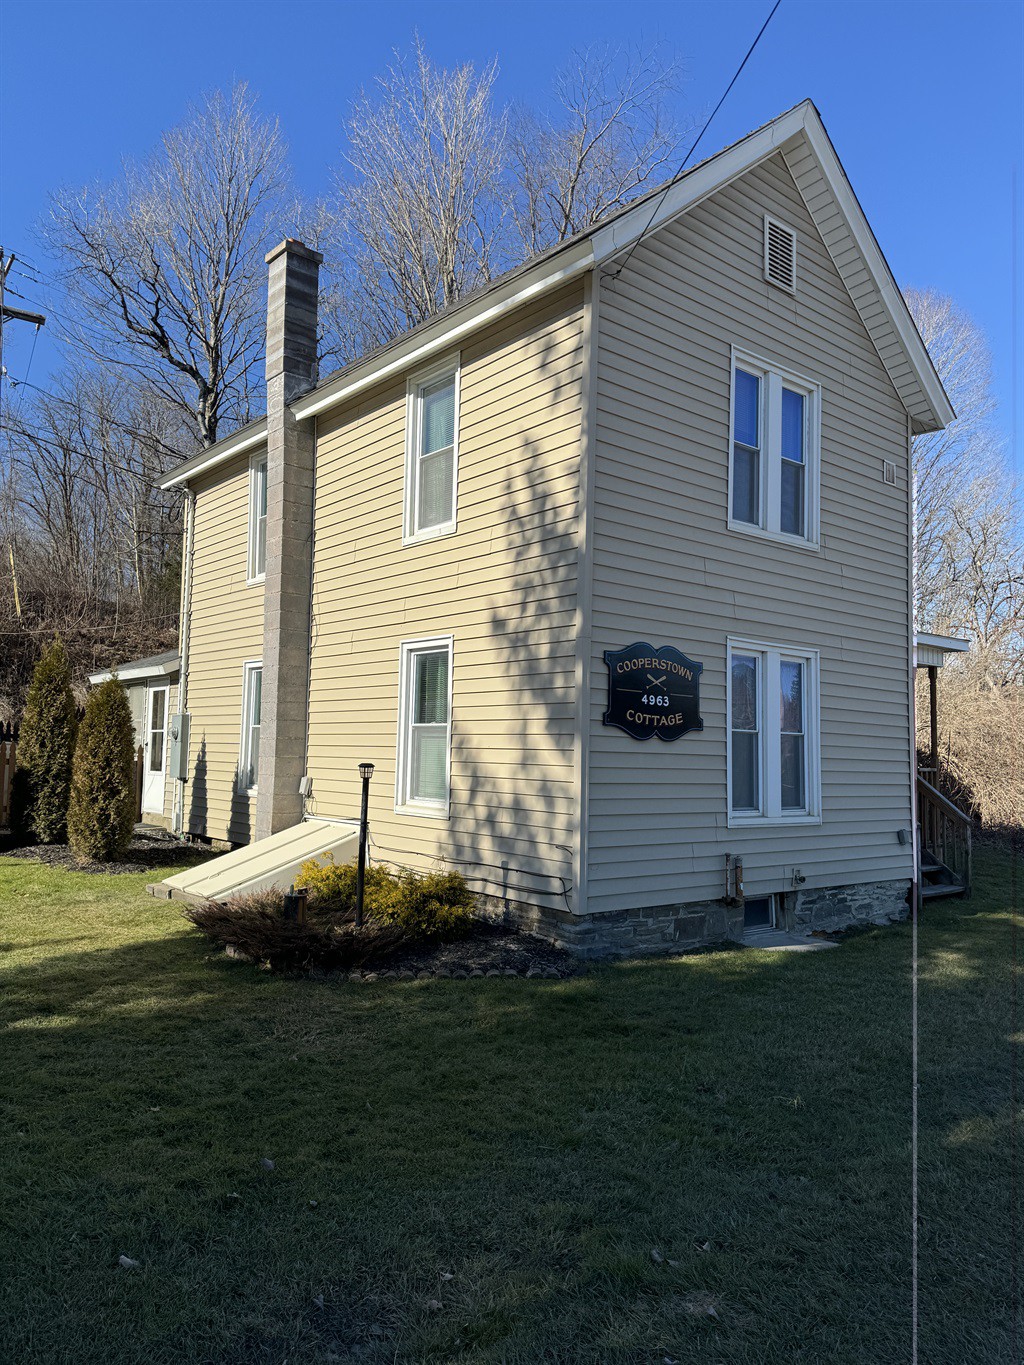 Cooperstown Cottage - 2 miles to Cooperstown Dream